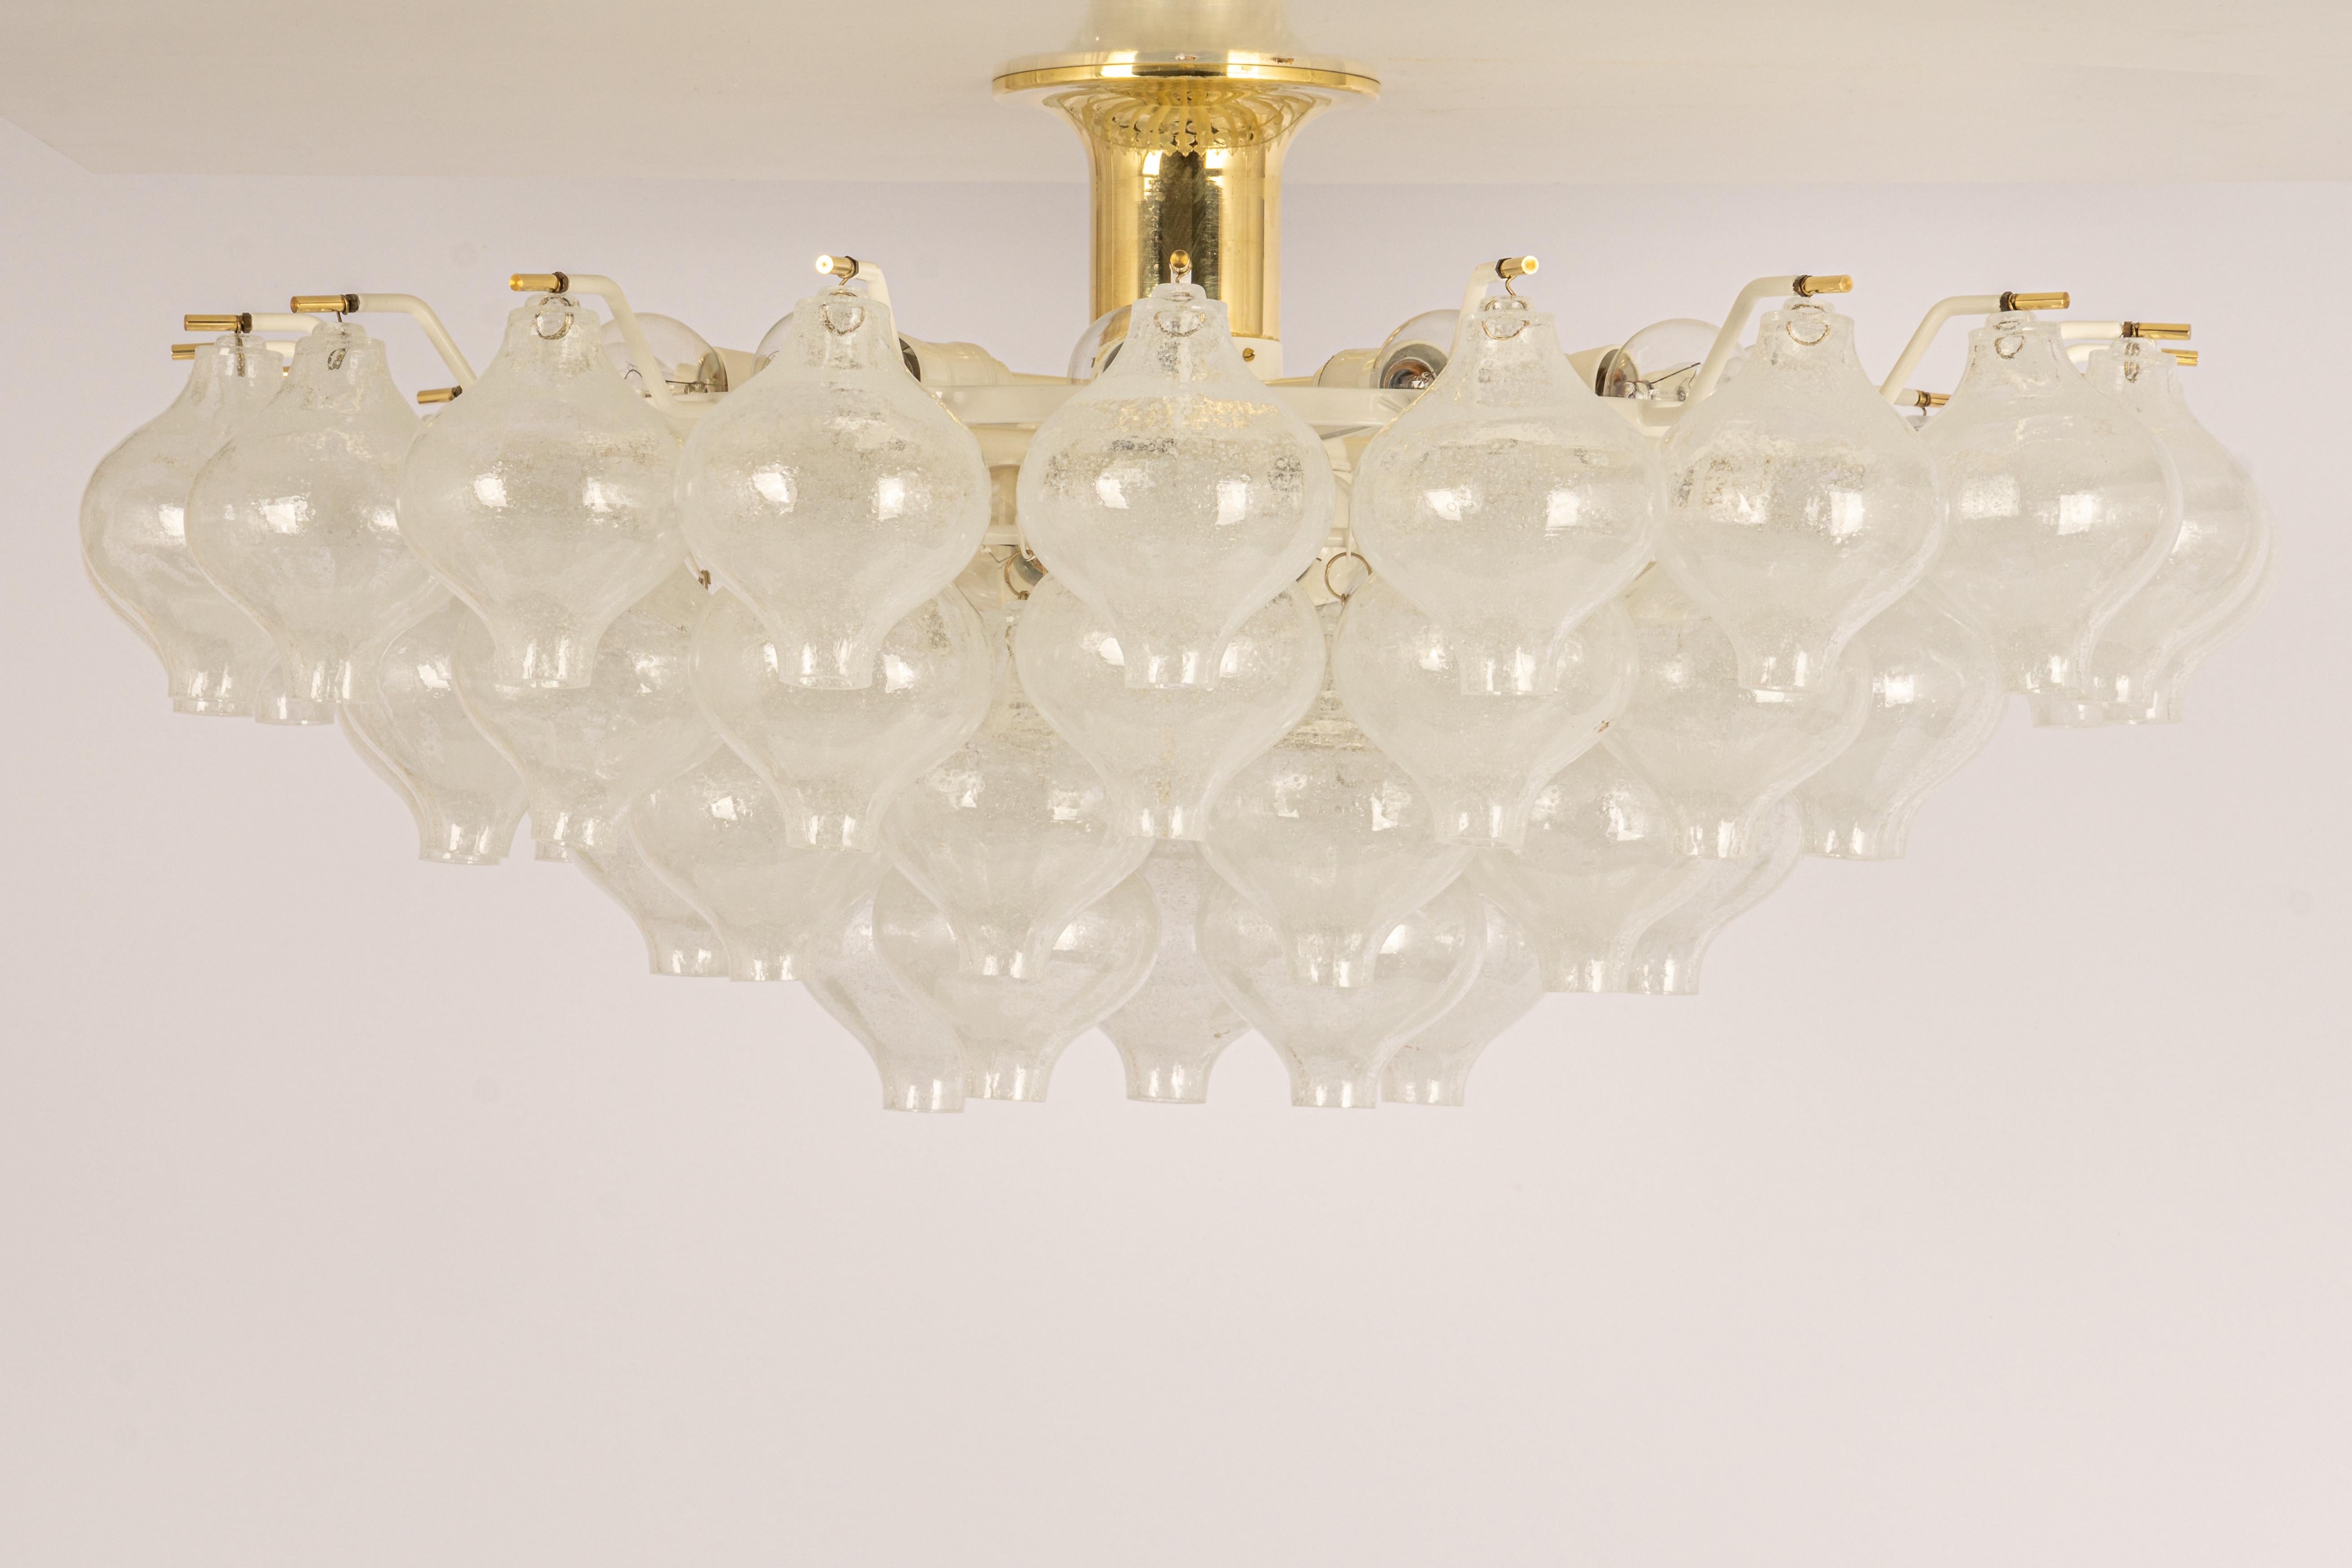 Wonderful onion-shaped -Tulipan glass chandelier. Forty-nine hand-blown glasses suspended on a white-colored metal frame.

The Kalmar Tulipan Chandelier is a stunning and timeless lighting fixture that combines elegance, craftsmanship, and a touch